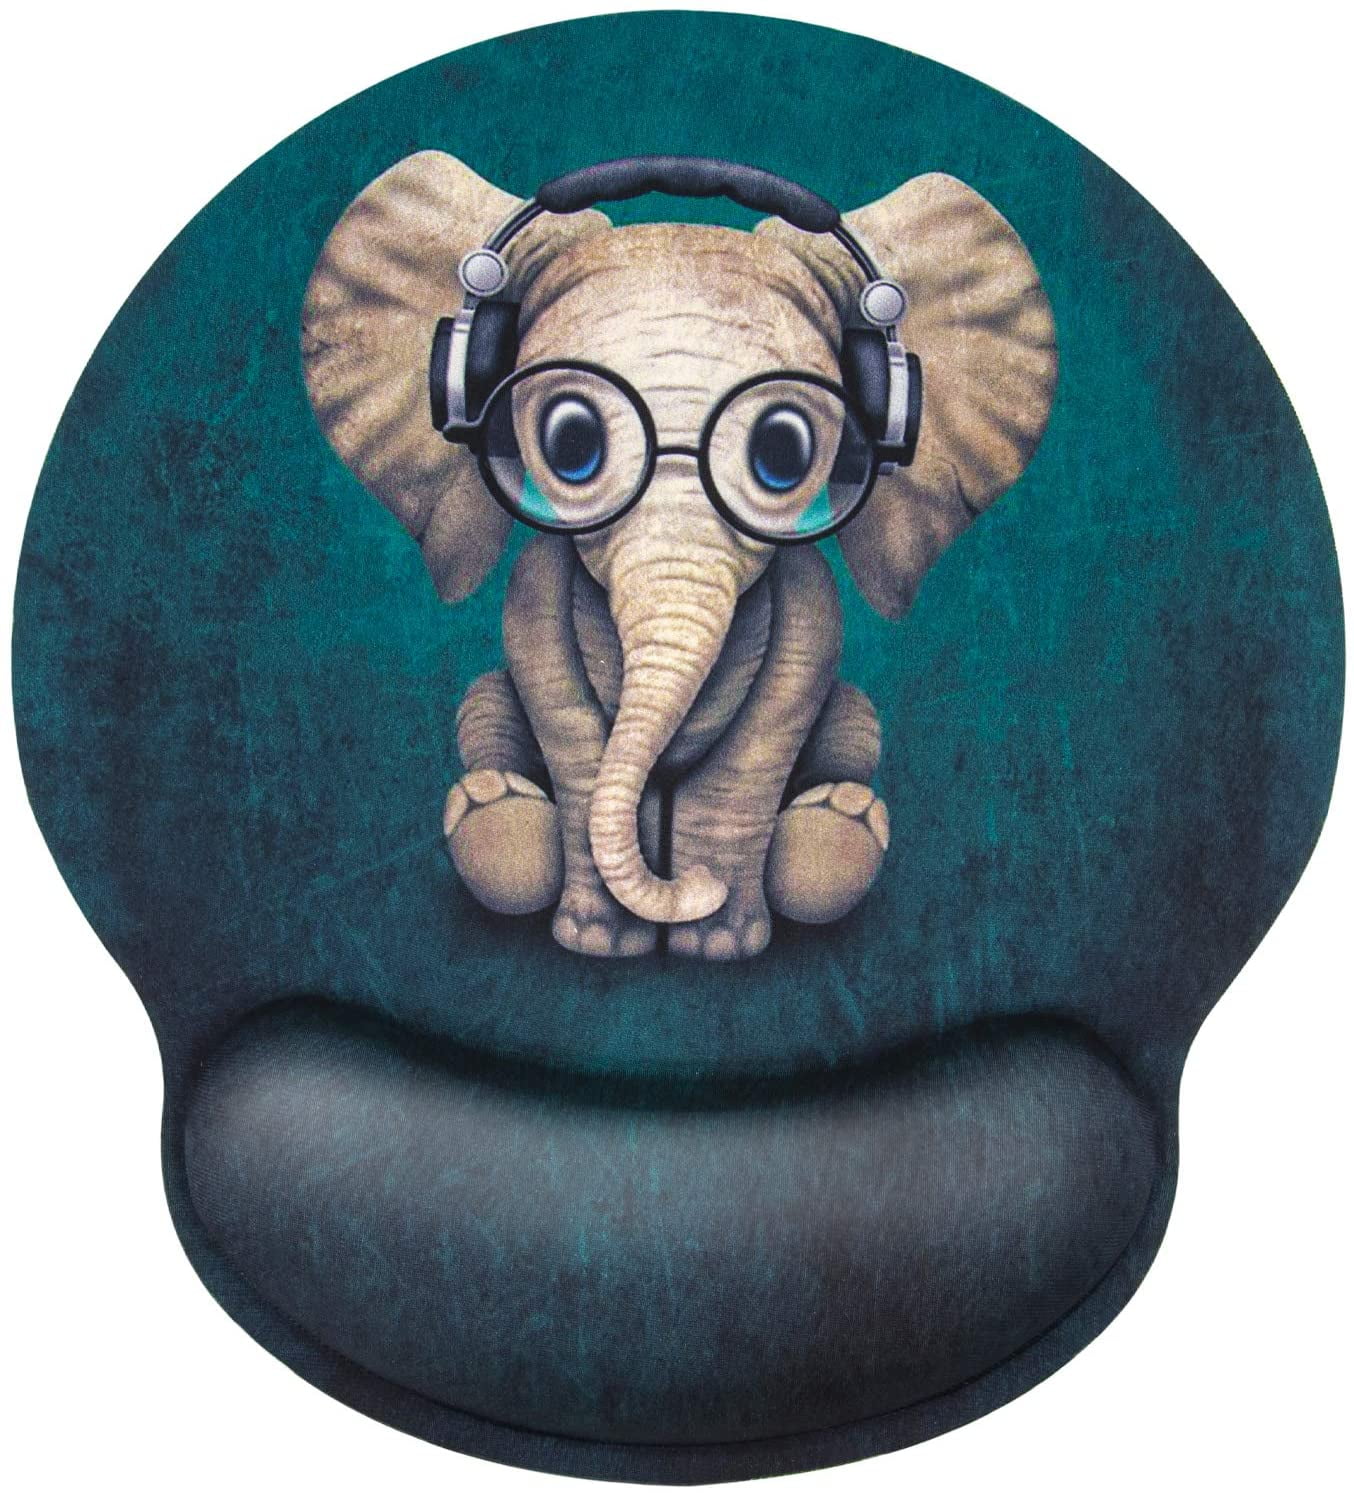 LESHIRY Mouse Pad Round Mouse Mat Waterproof Office Mouse Pad Bright Elephant Non-Slip Rubber Base Mousepad with Stitched Edge Cute Mouse Pad with Design 